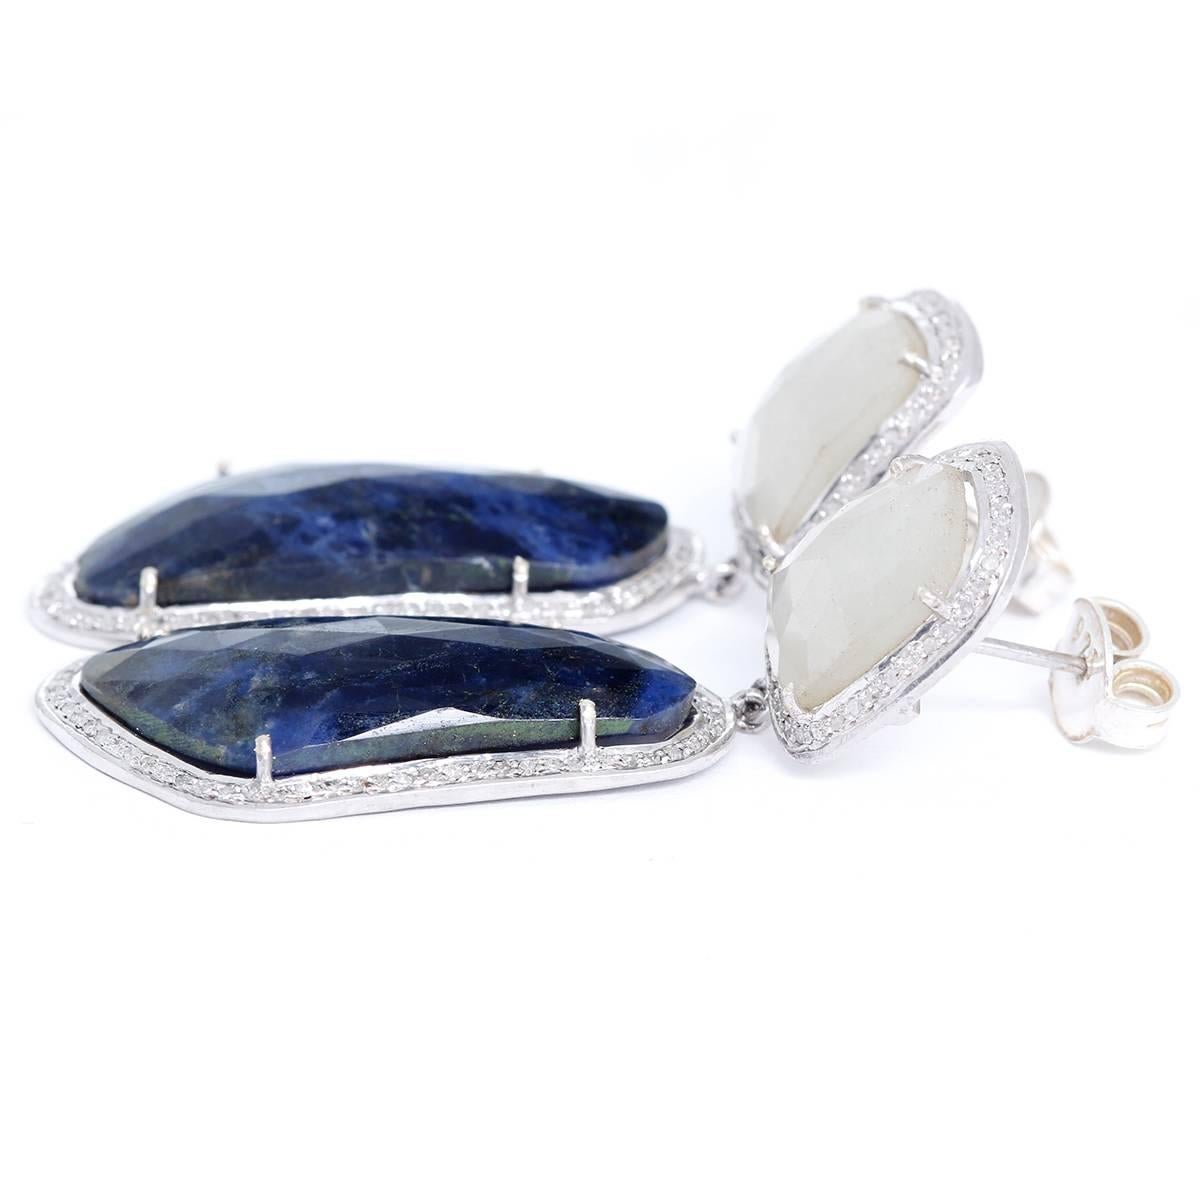 These beautiful earrings feature natural sapphires bordered by 1.7 ctw. of diamonds. Earrings measure apx. 2-3/8 inches in length. Total weight is 18.7 grams.